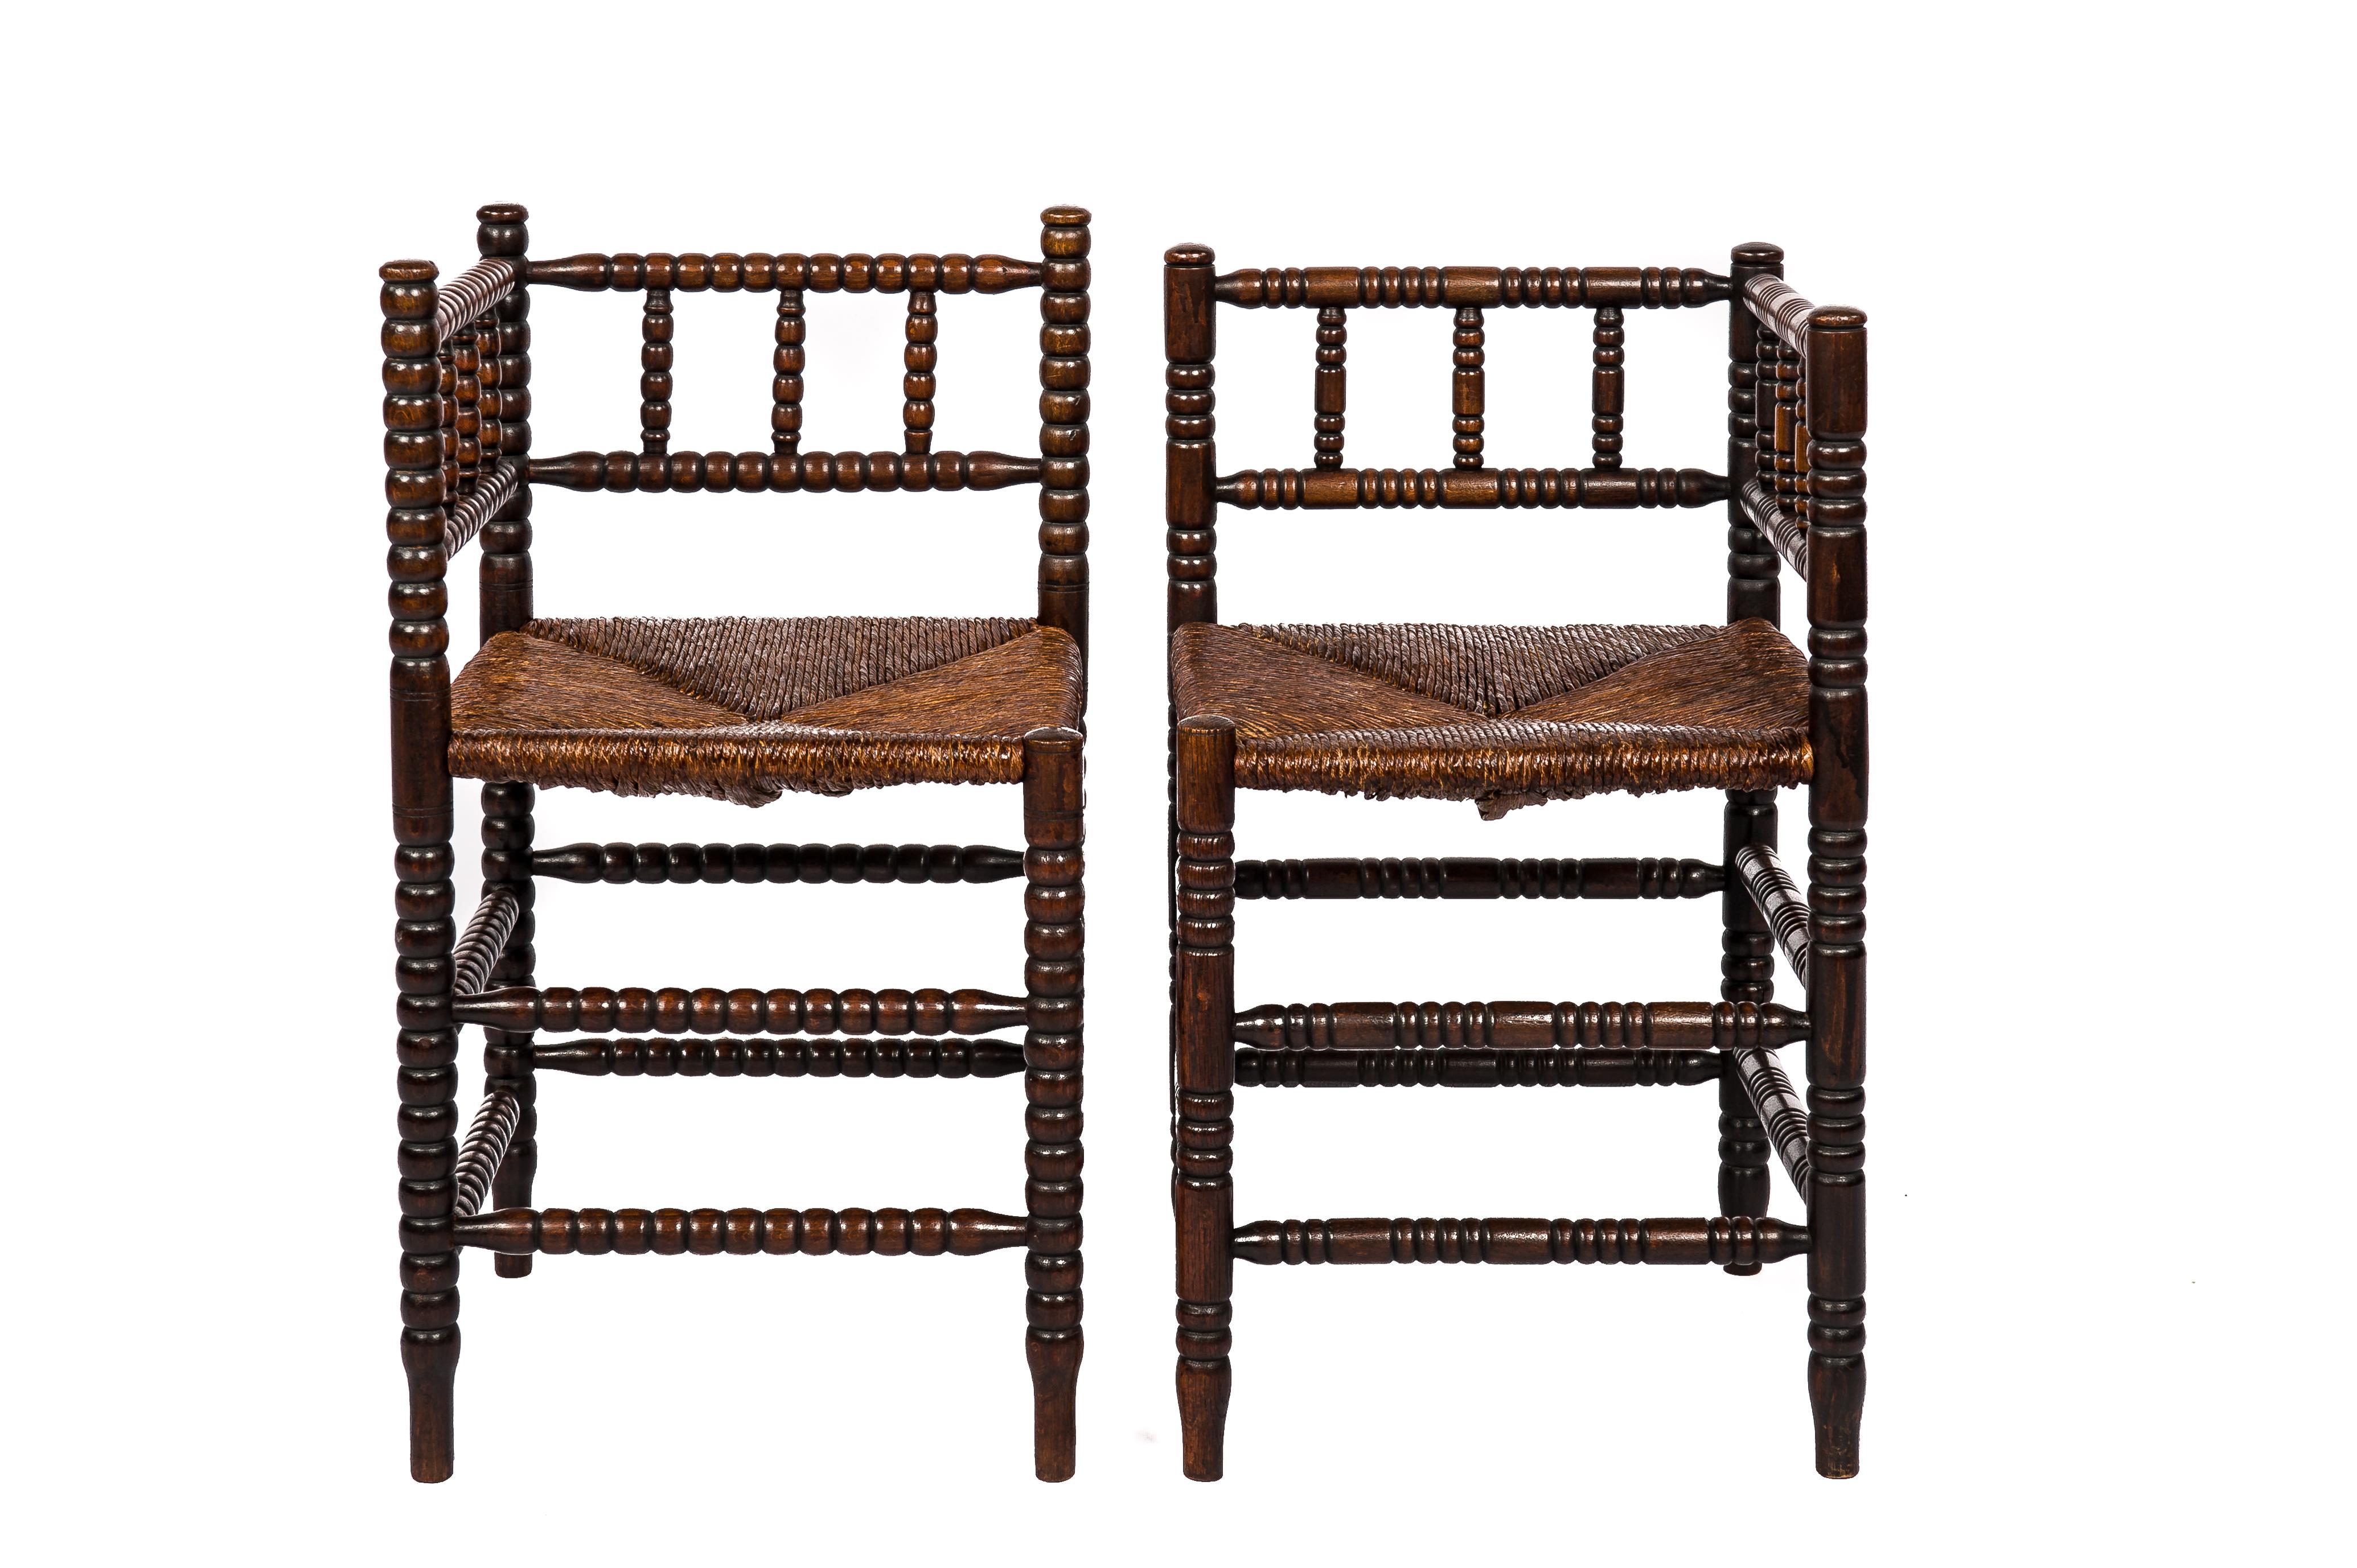 Discover a set of antique Bobbin chairs that captures the essence of mid-19th century France. These corner chairs, each with its own unique character, offer a touch of timeless elegance. Featuring hand-woven rush seats adorned with a rich patina,